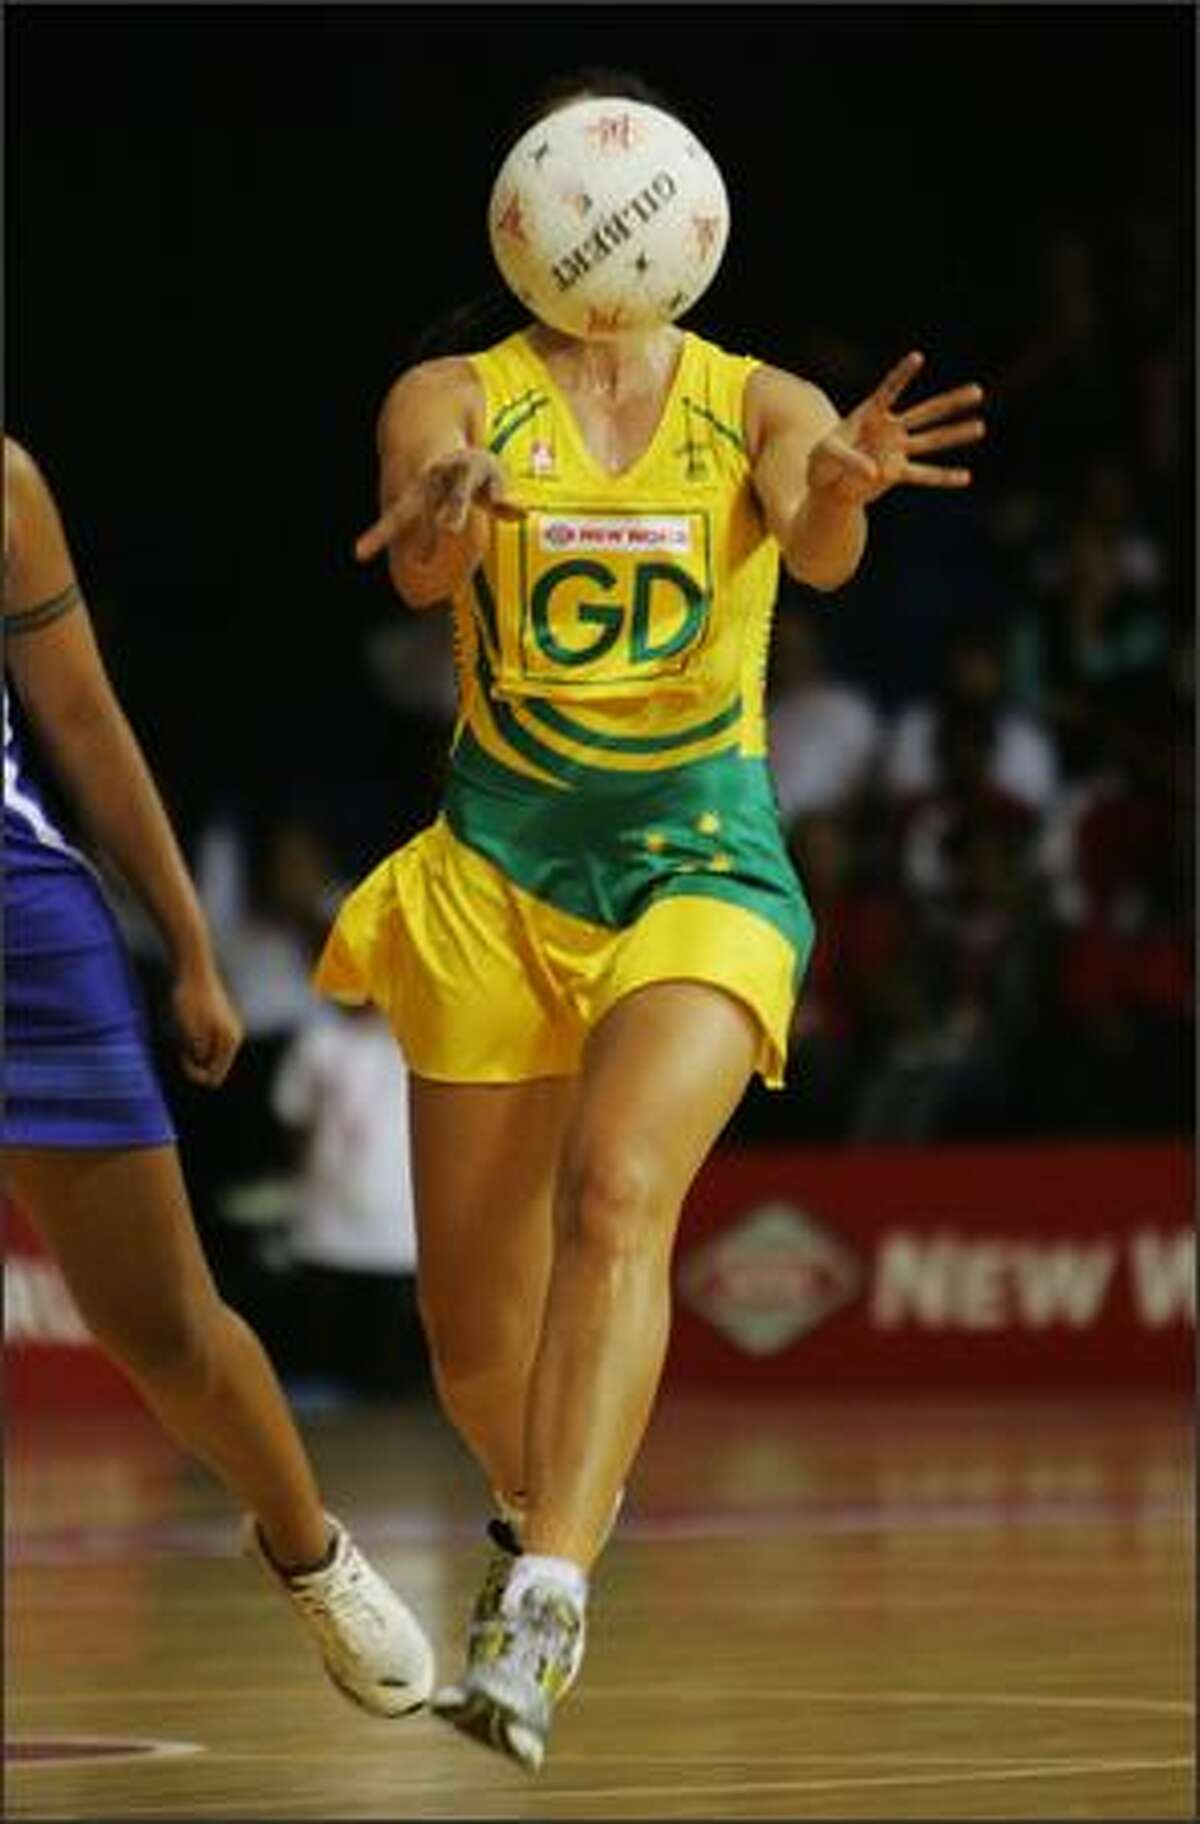 Mo'onia Gerrard of Australia passes the ball during the 2007 Netball World Championship pool B match between Australia and Samoa at the Trusts Stadium in Auckland, New Zealand. (Photo by Sandra Mu/Getty Images)